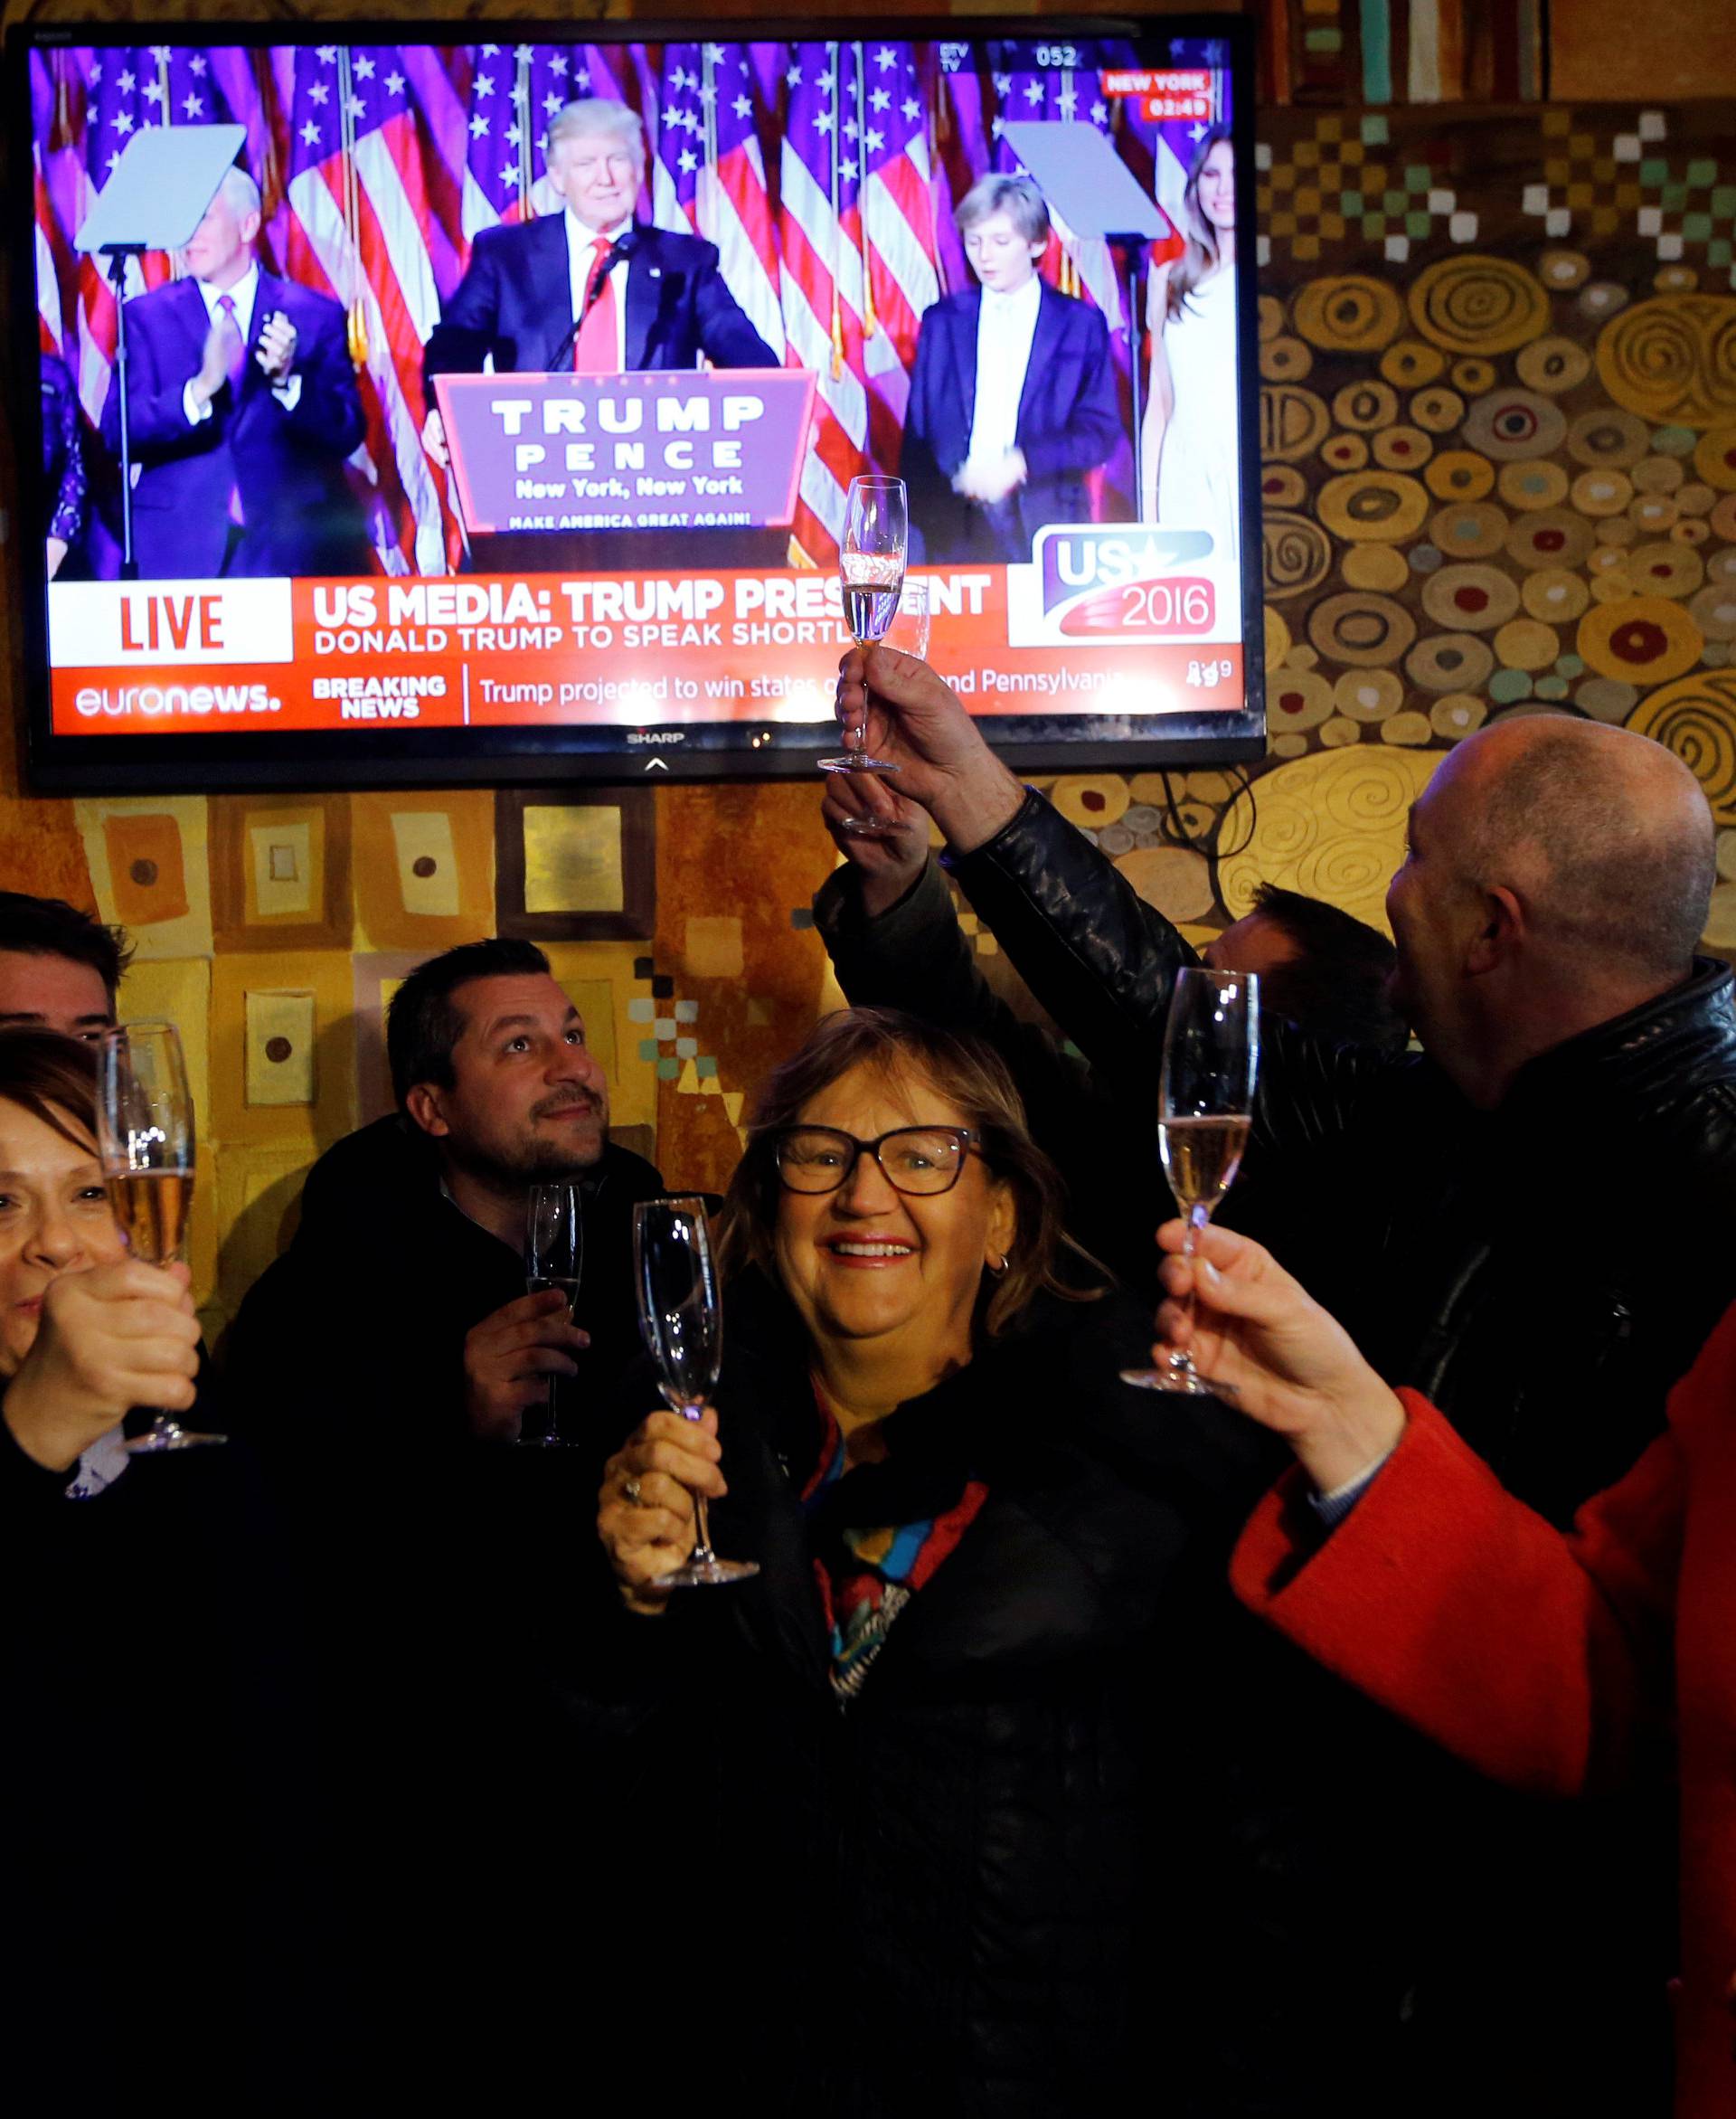 Residents celebrate during the U.S. presidential election in Melania Trump's hometown of Sevnica